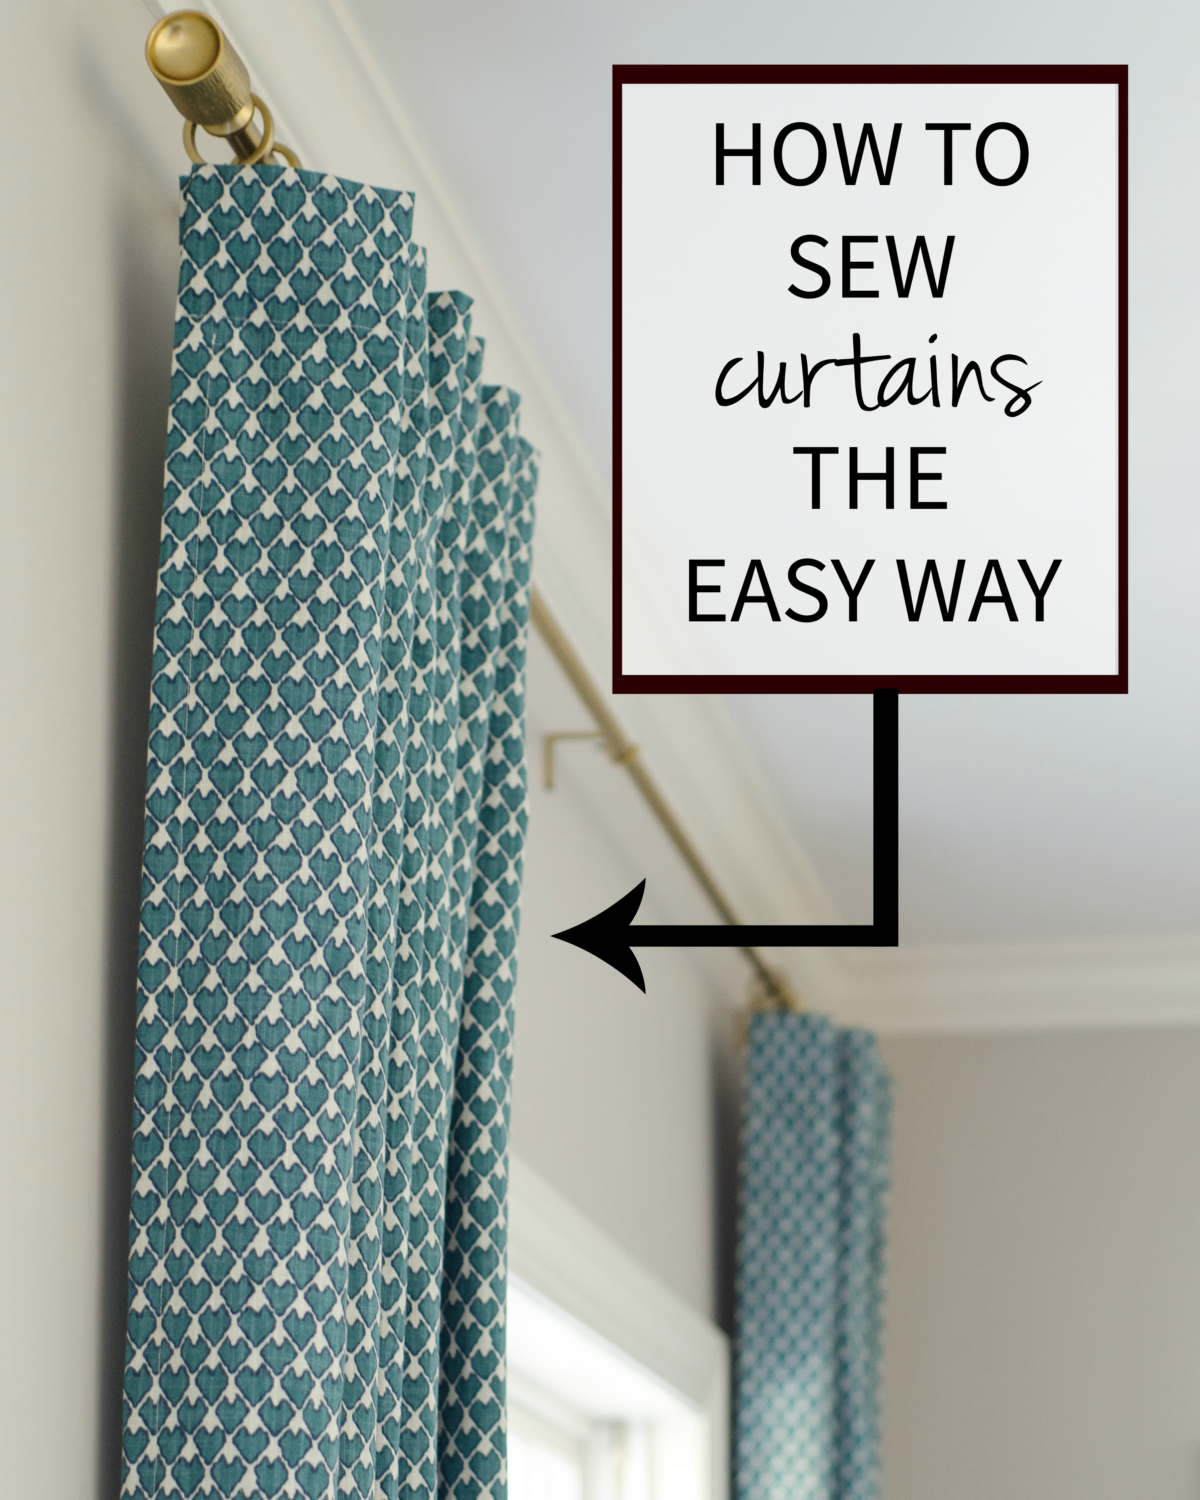 How to Hem Curtains the Easy Way